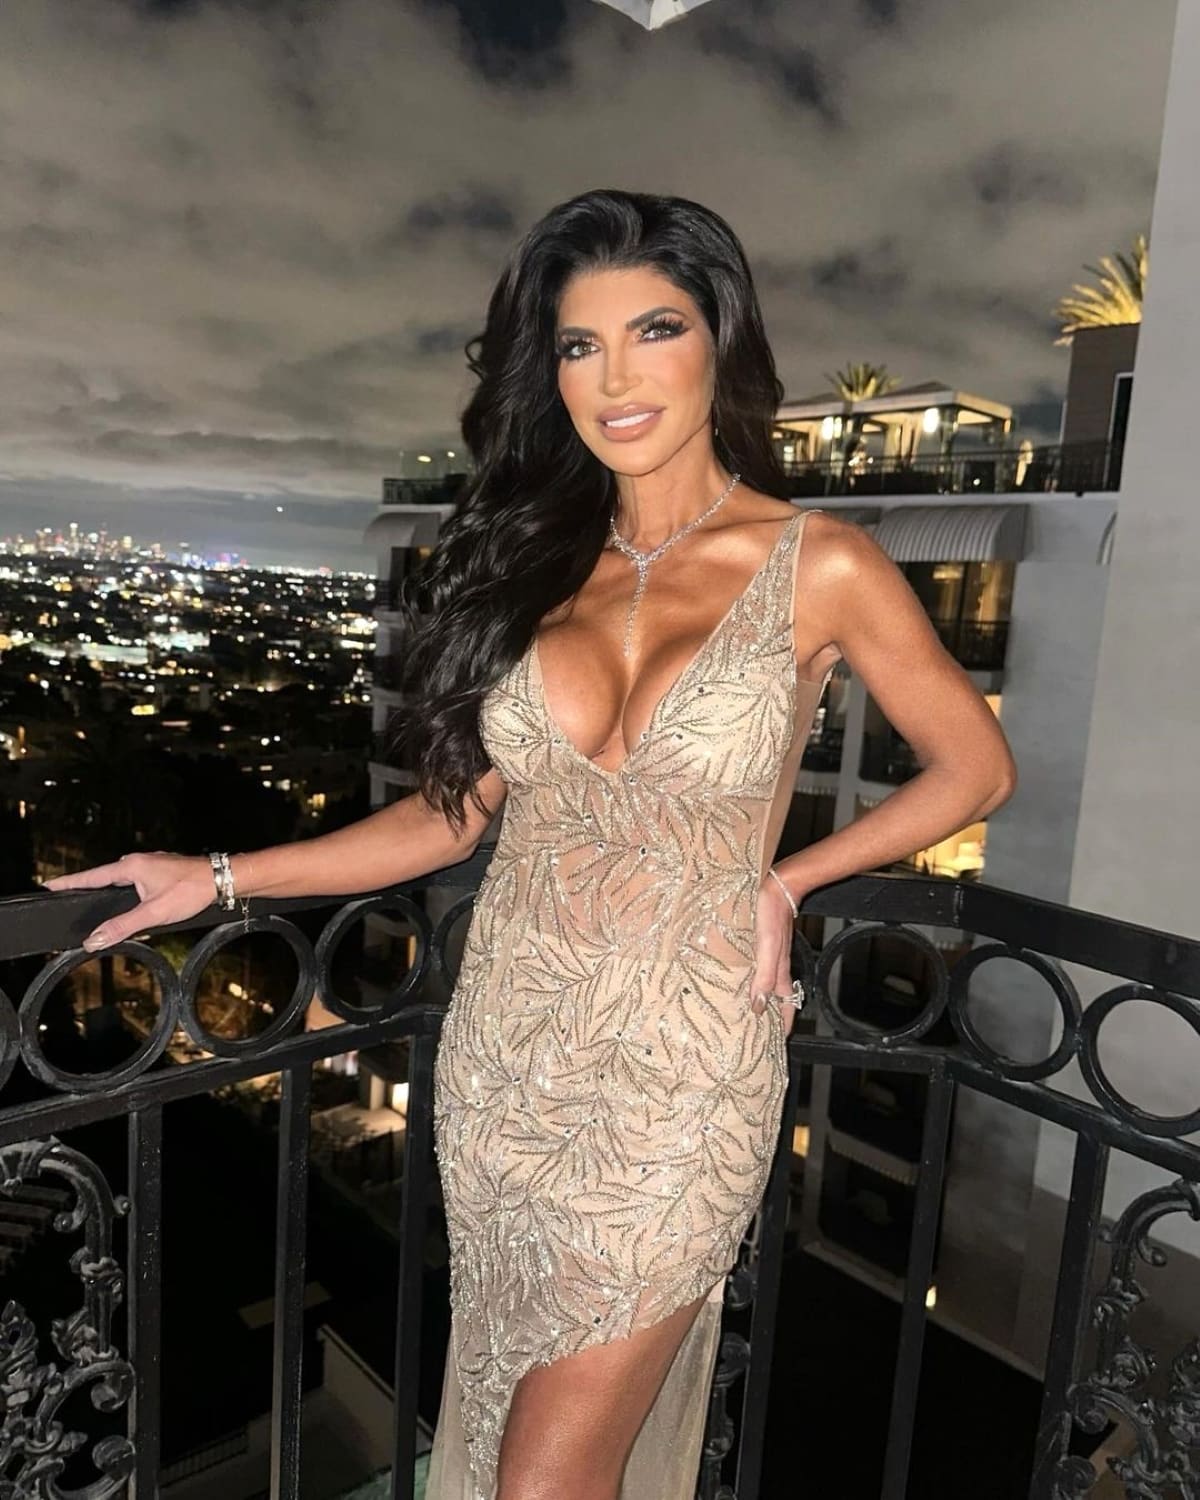 RHONJ Star Teresa Giudice is Called Out for “Pushing Past” Disabled Passengers to Board Plance at Airport